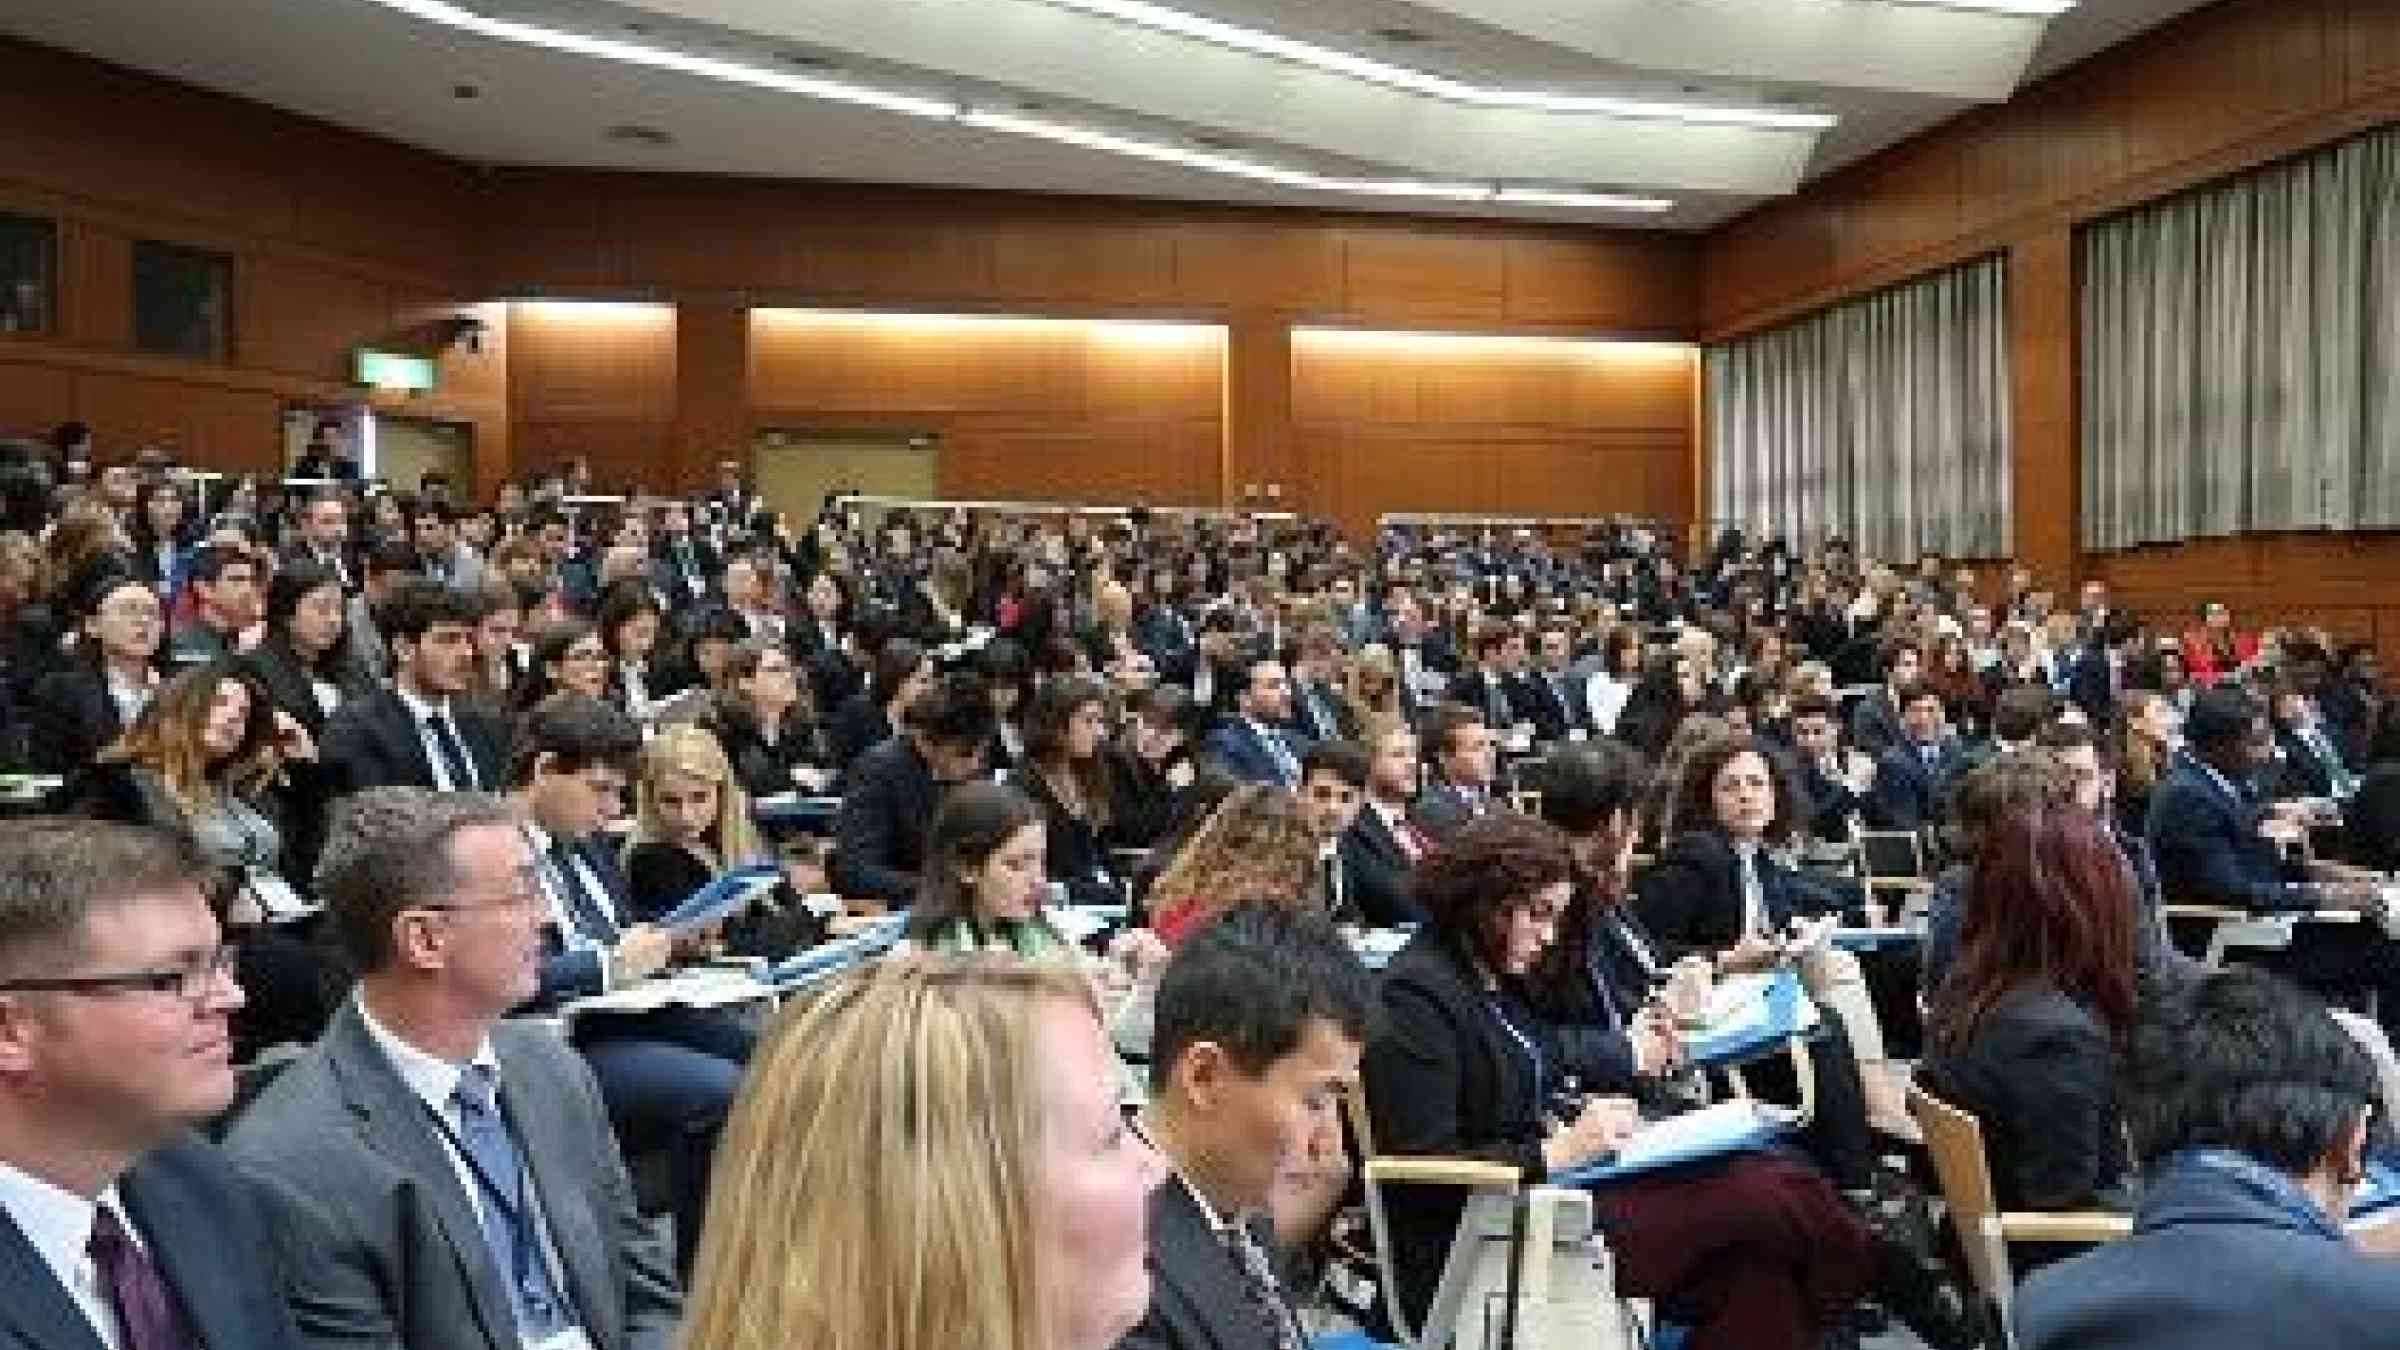 350 students from 11 countries took part in the forum on disaster risk reduction during the National Model United Nations (Photo: UNISDR)